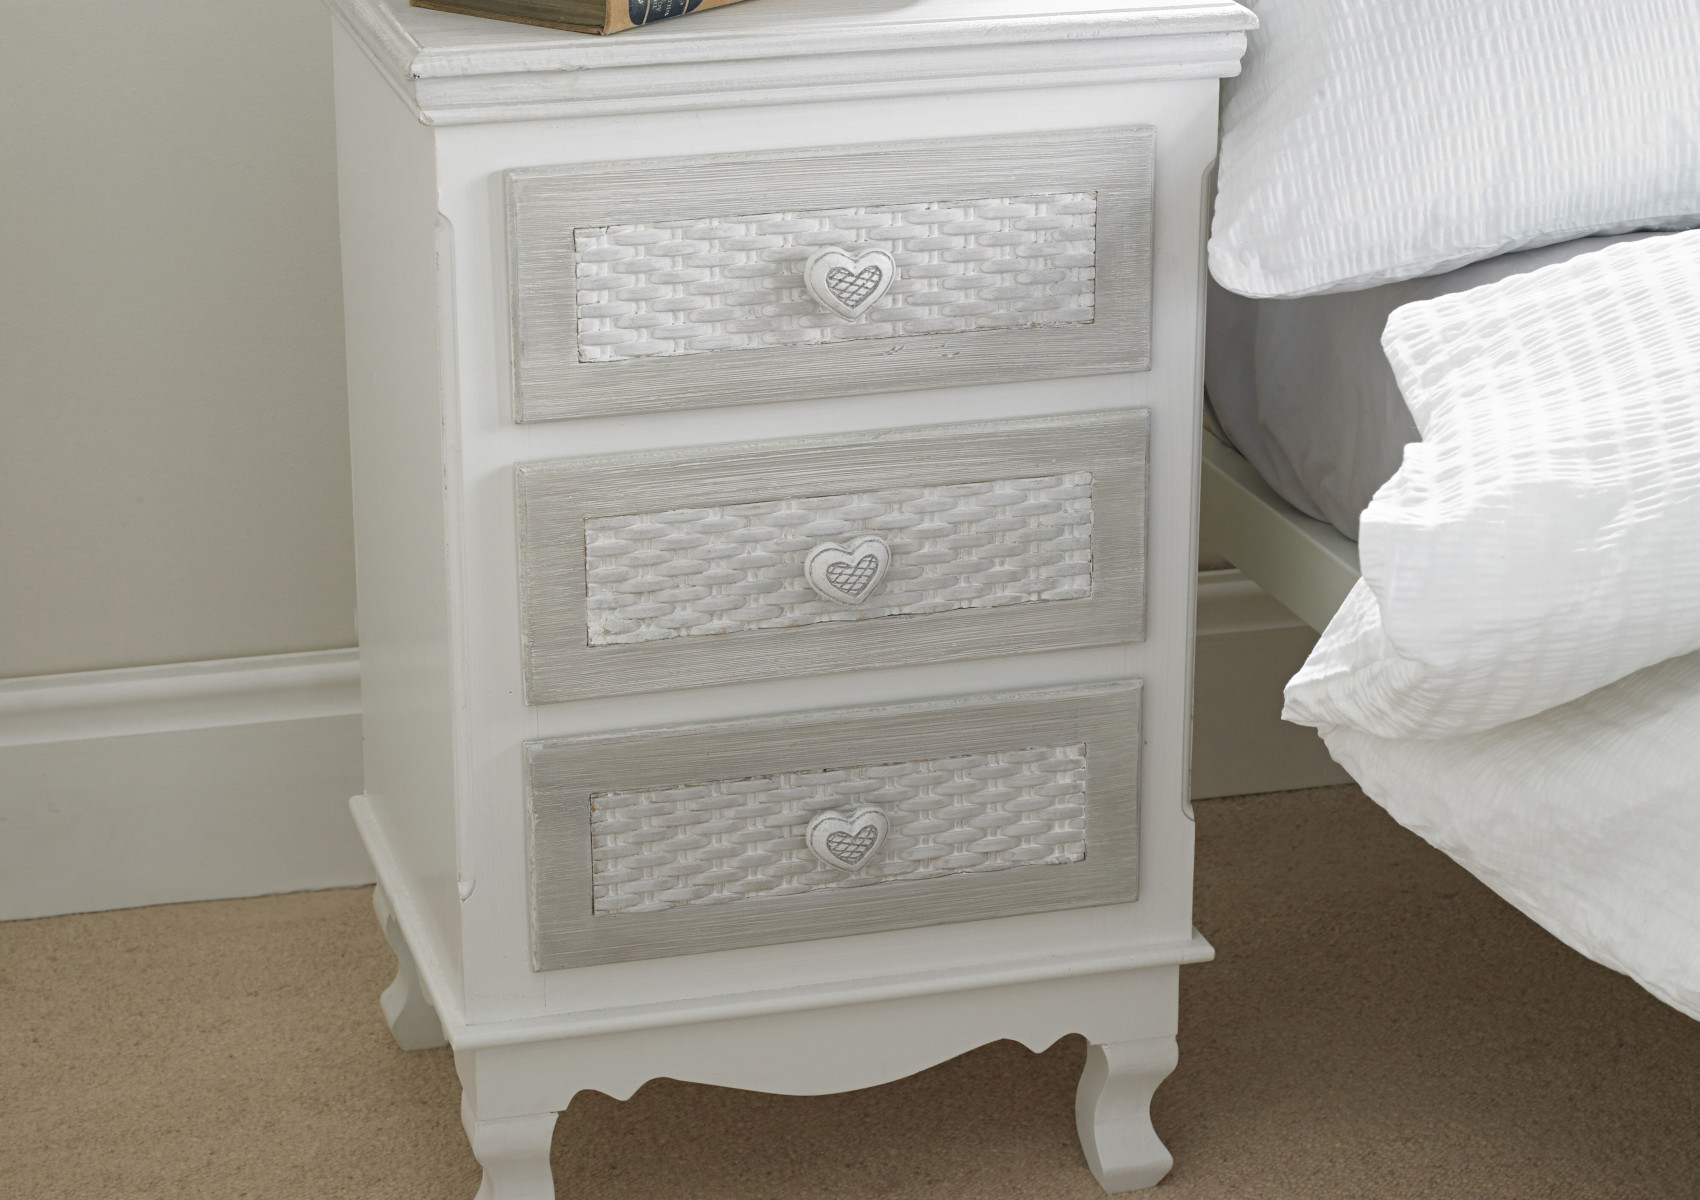 View Brittany WhiteGrey 3 Drawer Bedside Cabinet Time4Sleep information